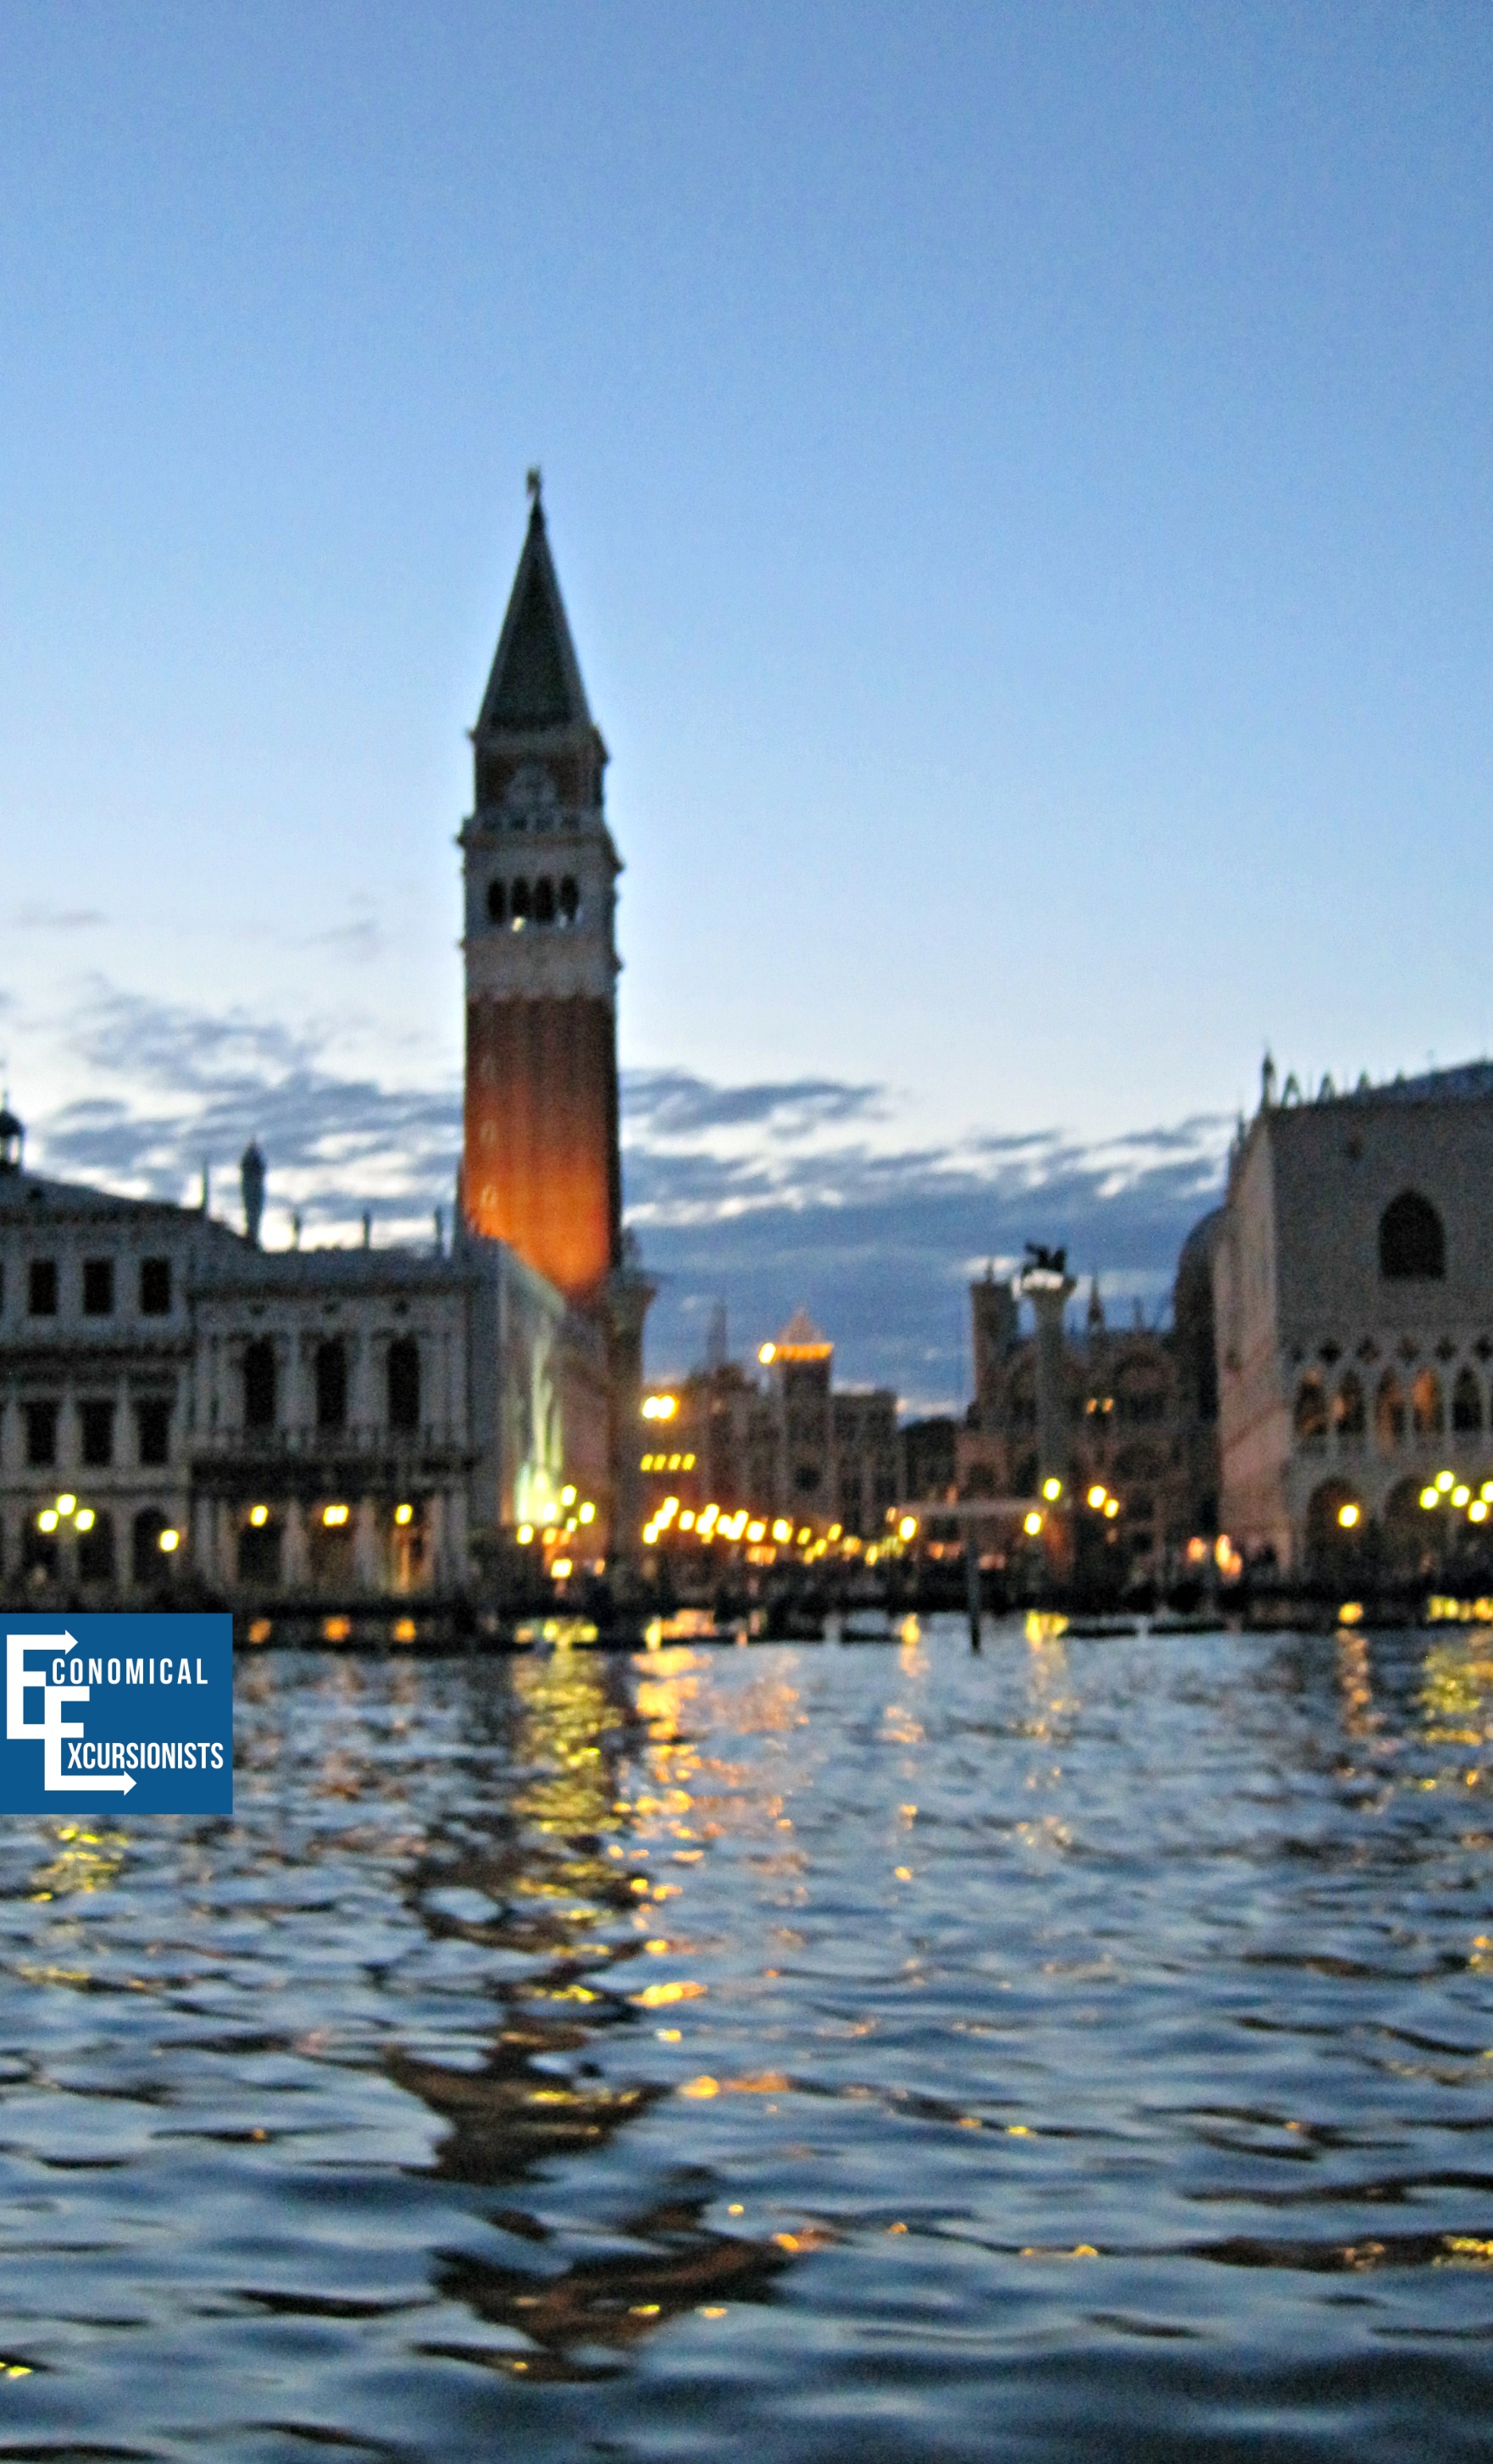 Brilliant! Save money by skipping the Gondola ride and instead using the local ferry to see the Grand Canal